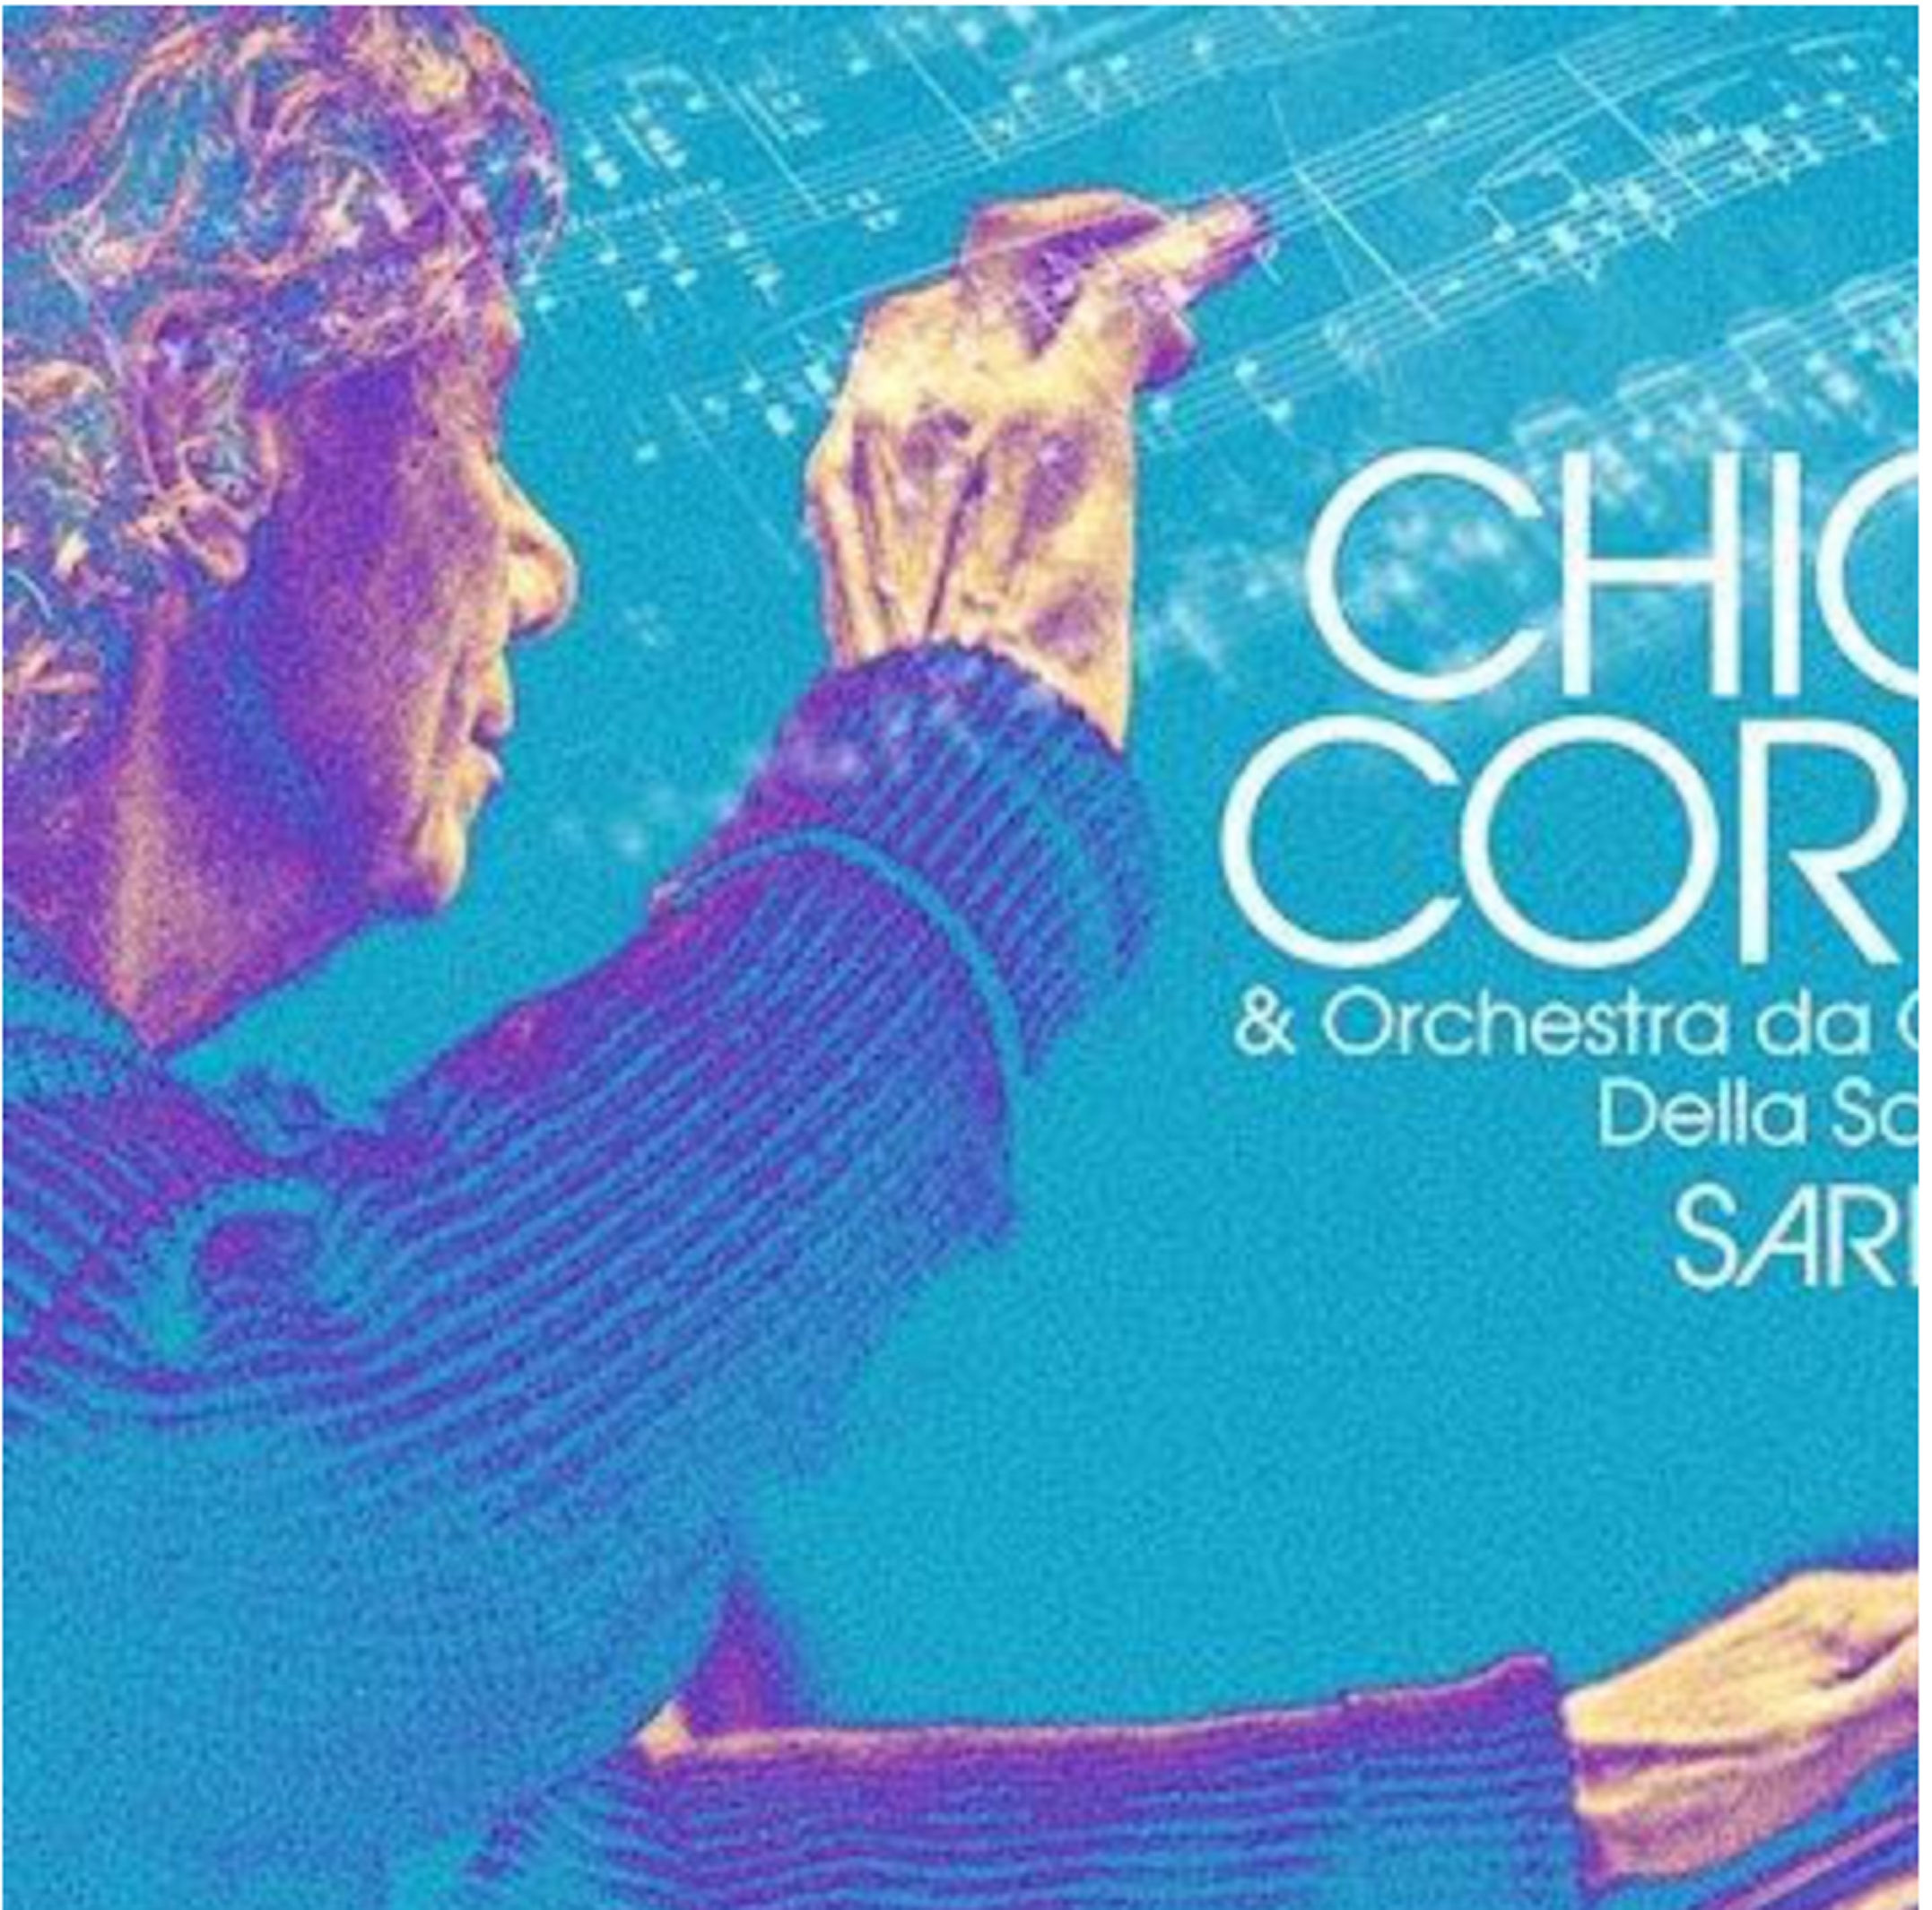 Candid Records Releases New Album From Chick Corea